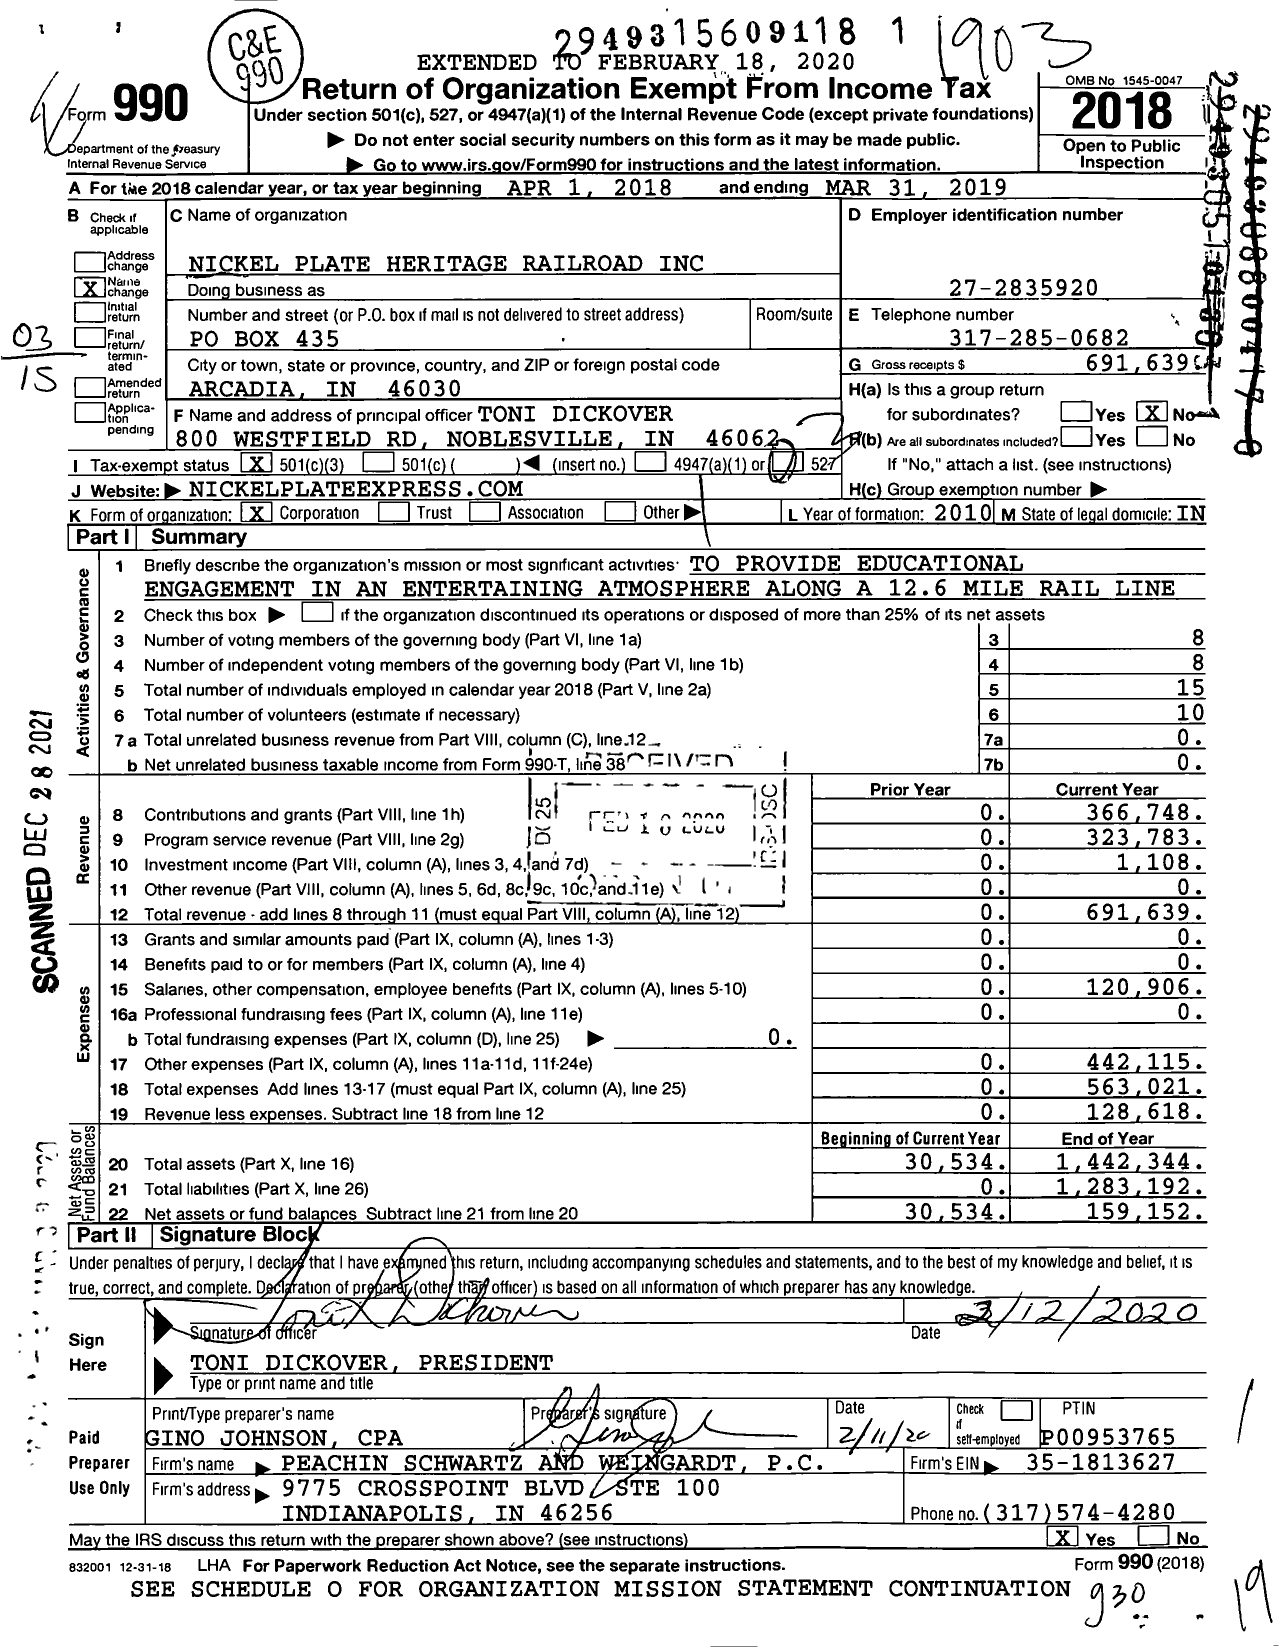 Image of first page of 2018 Form 990 for Nickel Plate Heritage Railroad